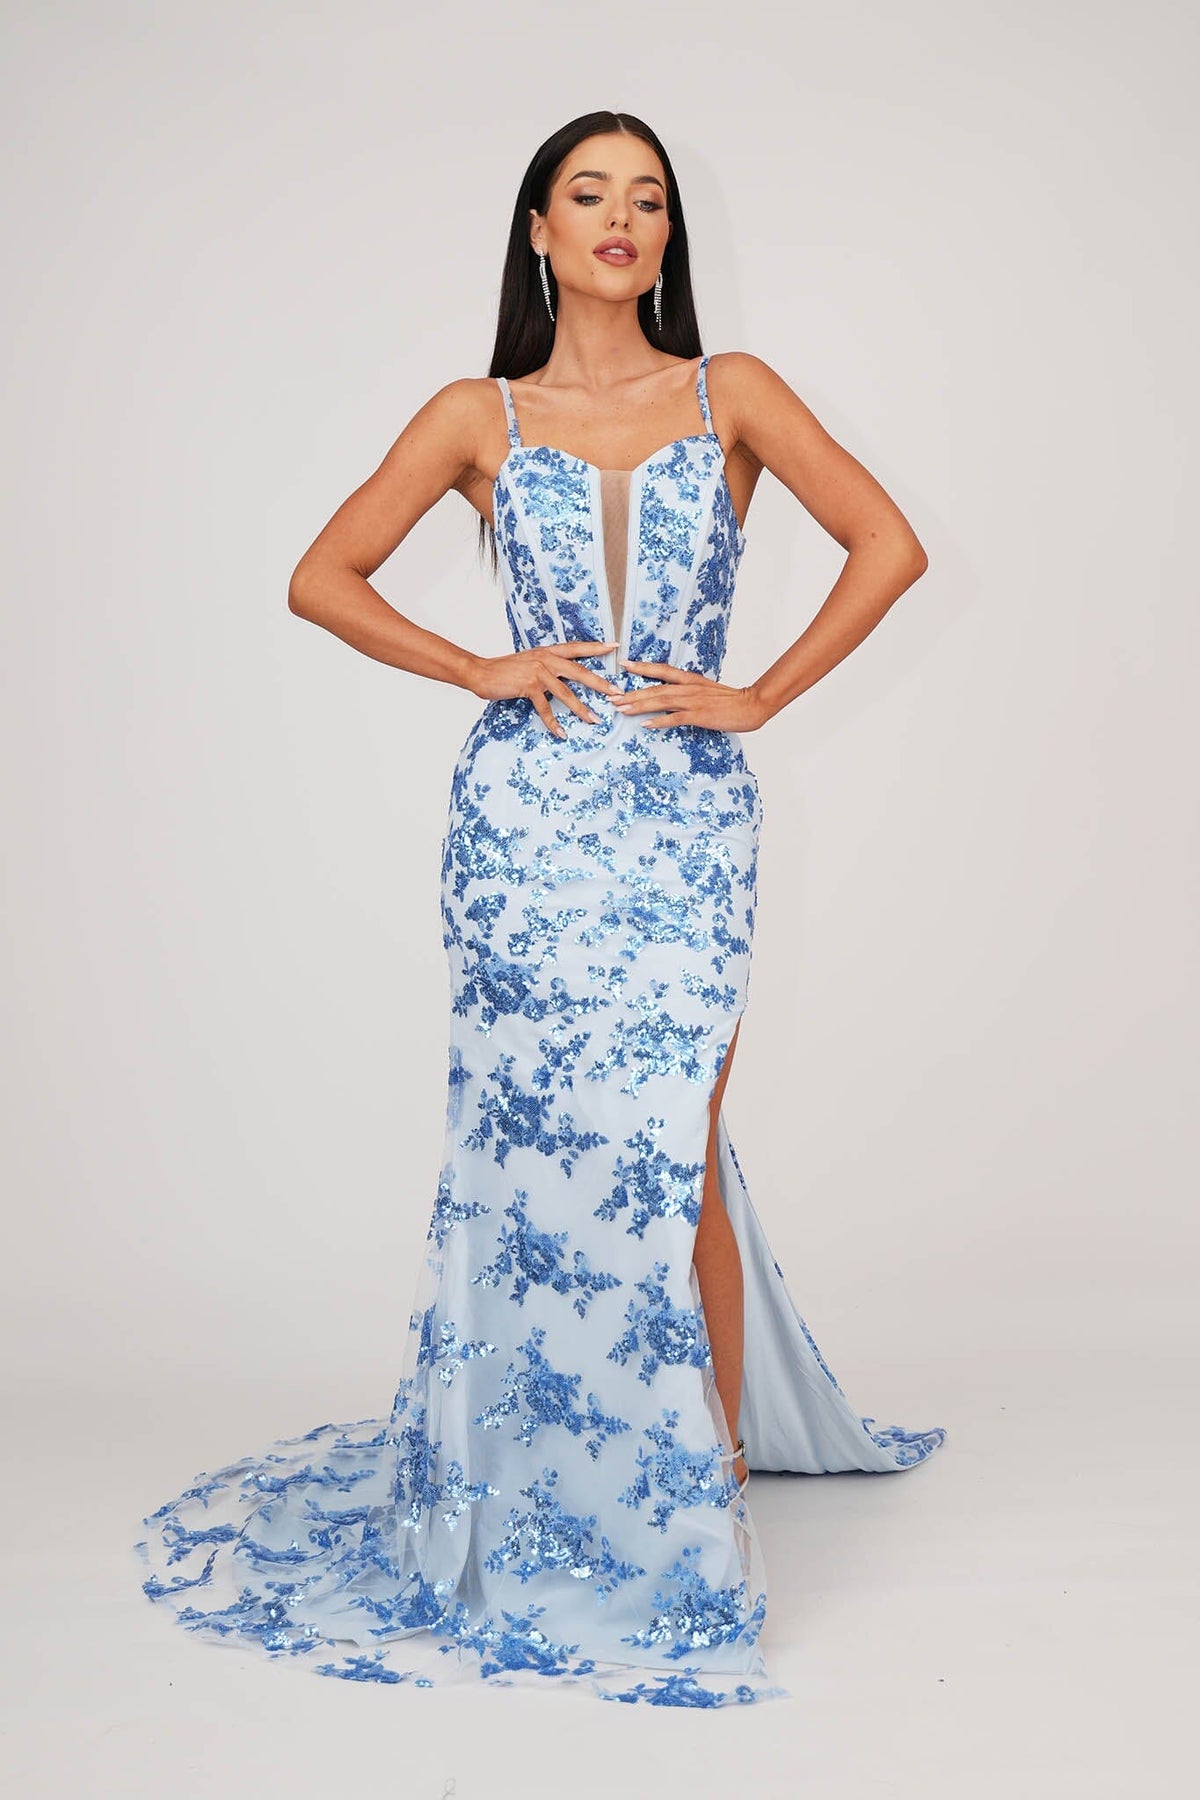 Light Blue Floral Embellished Sequins Floor Length Evening Gown with Corset Bodice, Mesh Insert, Side Slit and Lace Up Open Back 